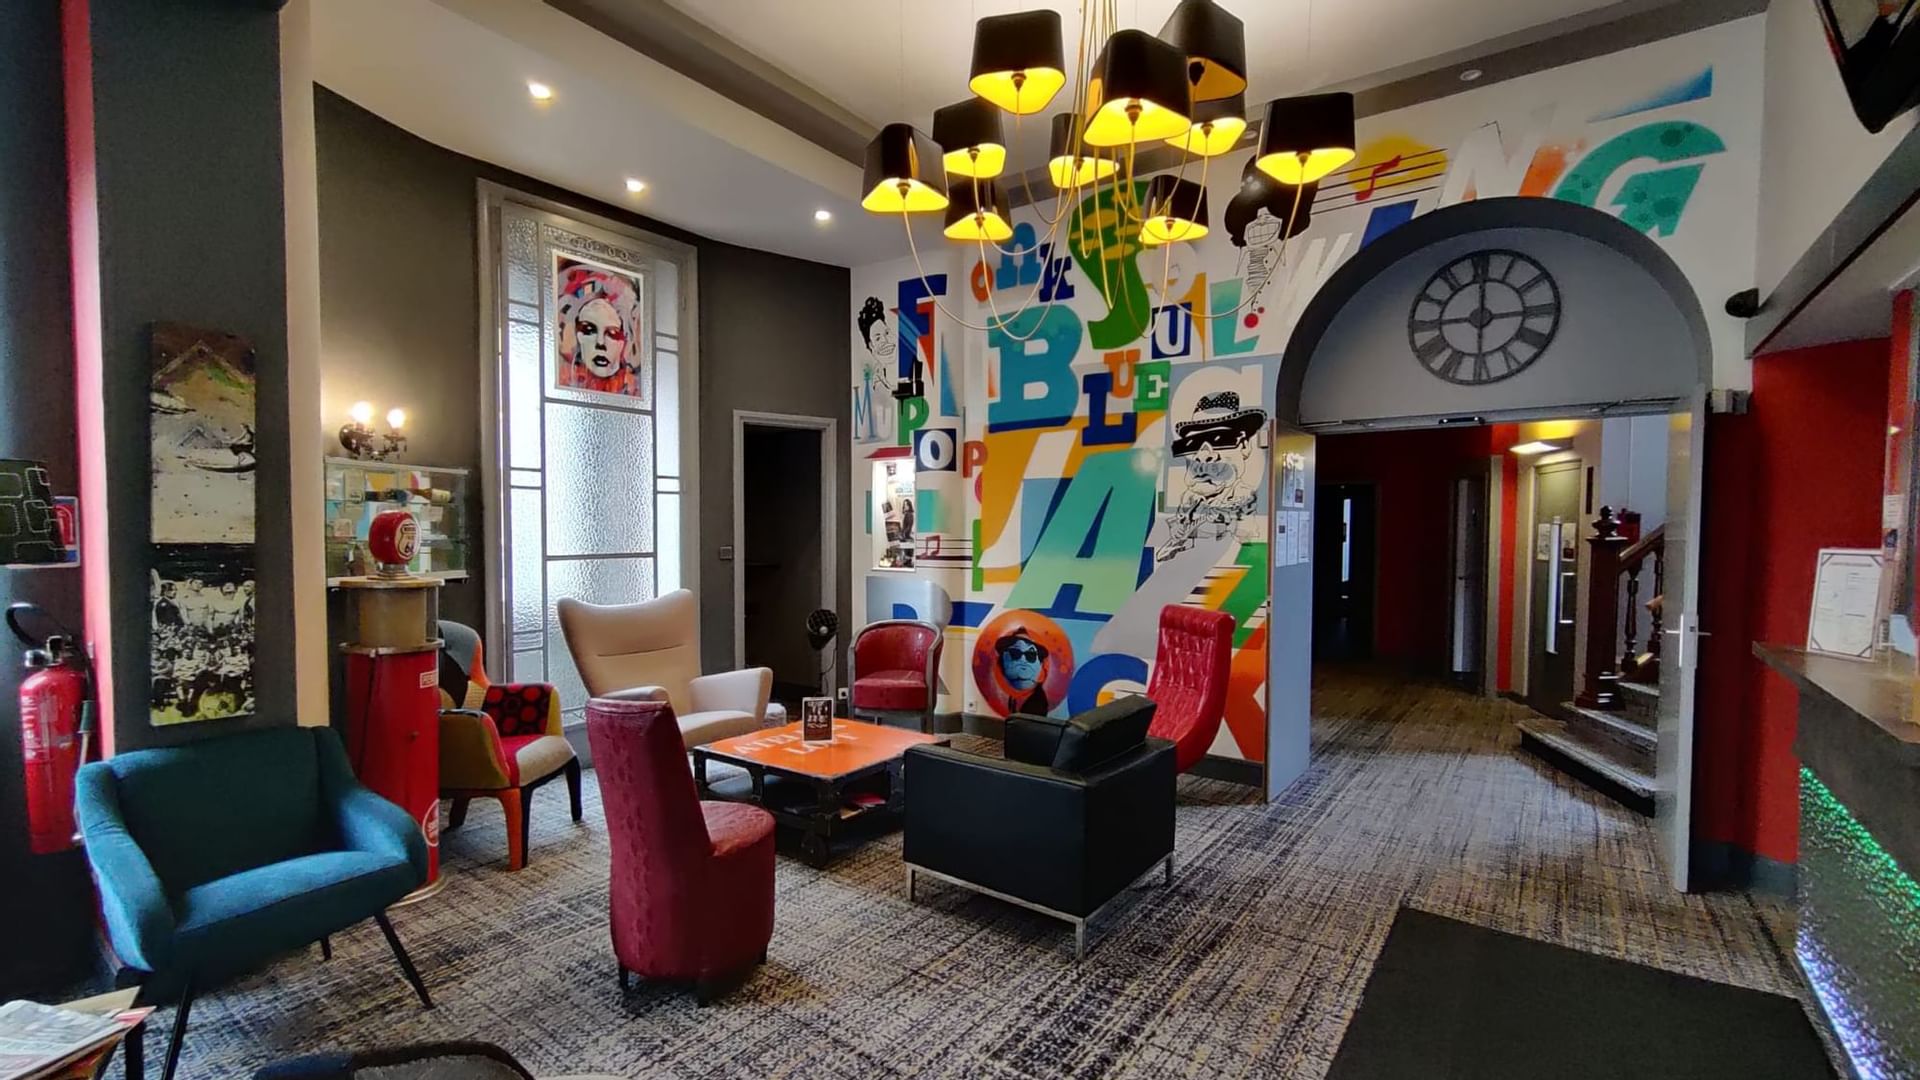 Modern lobby area with mural art at The Originals Hotels